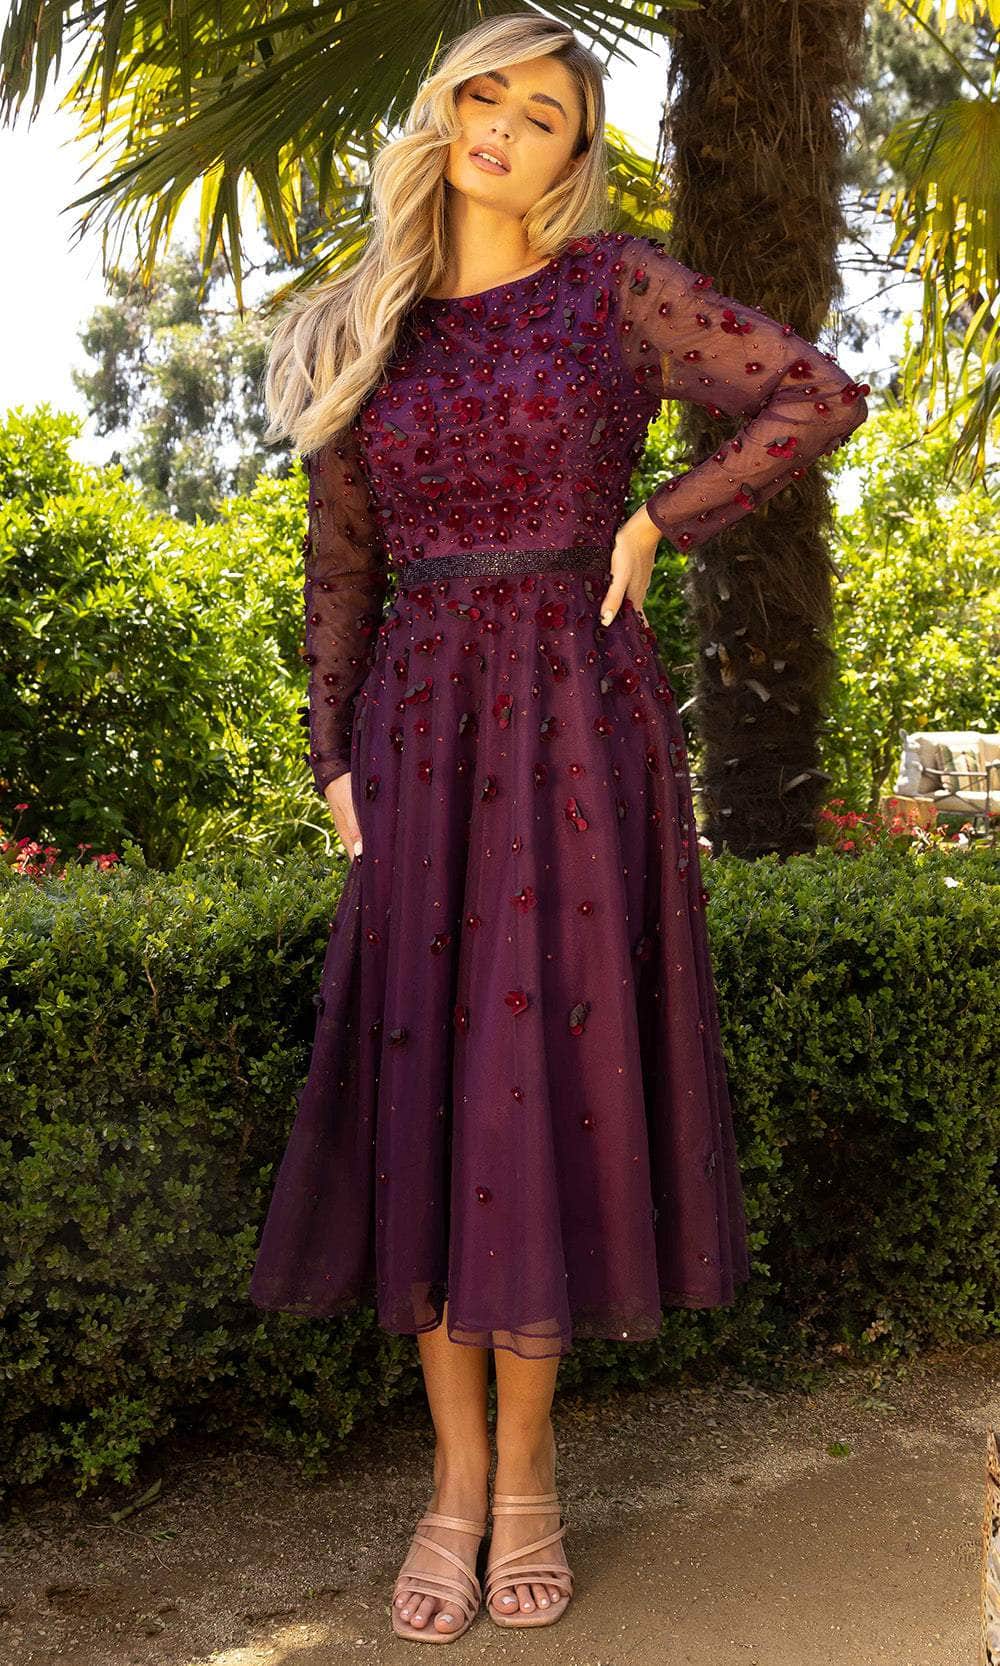 Primavera Couture 11072 - Embellished Long Sleeve Tea Length Dress Special Occasion Dress 2 / Aubergine